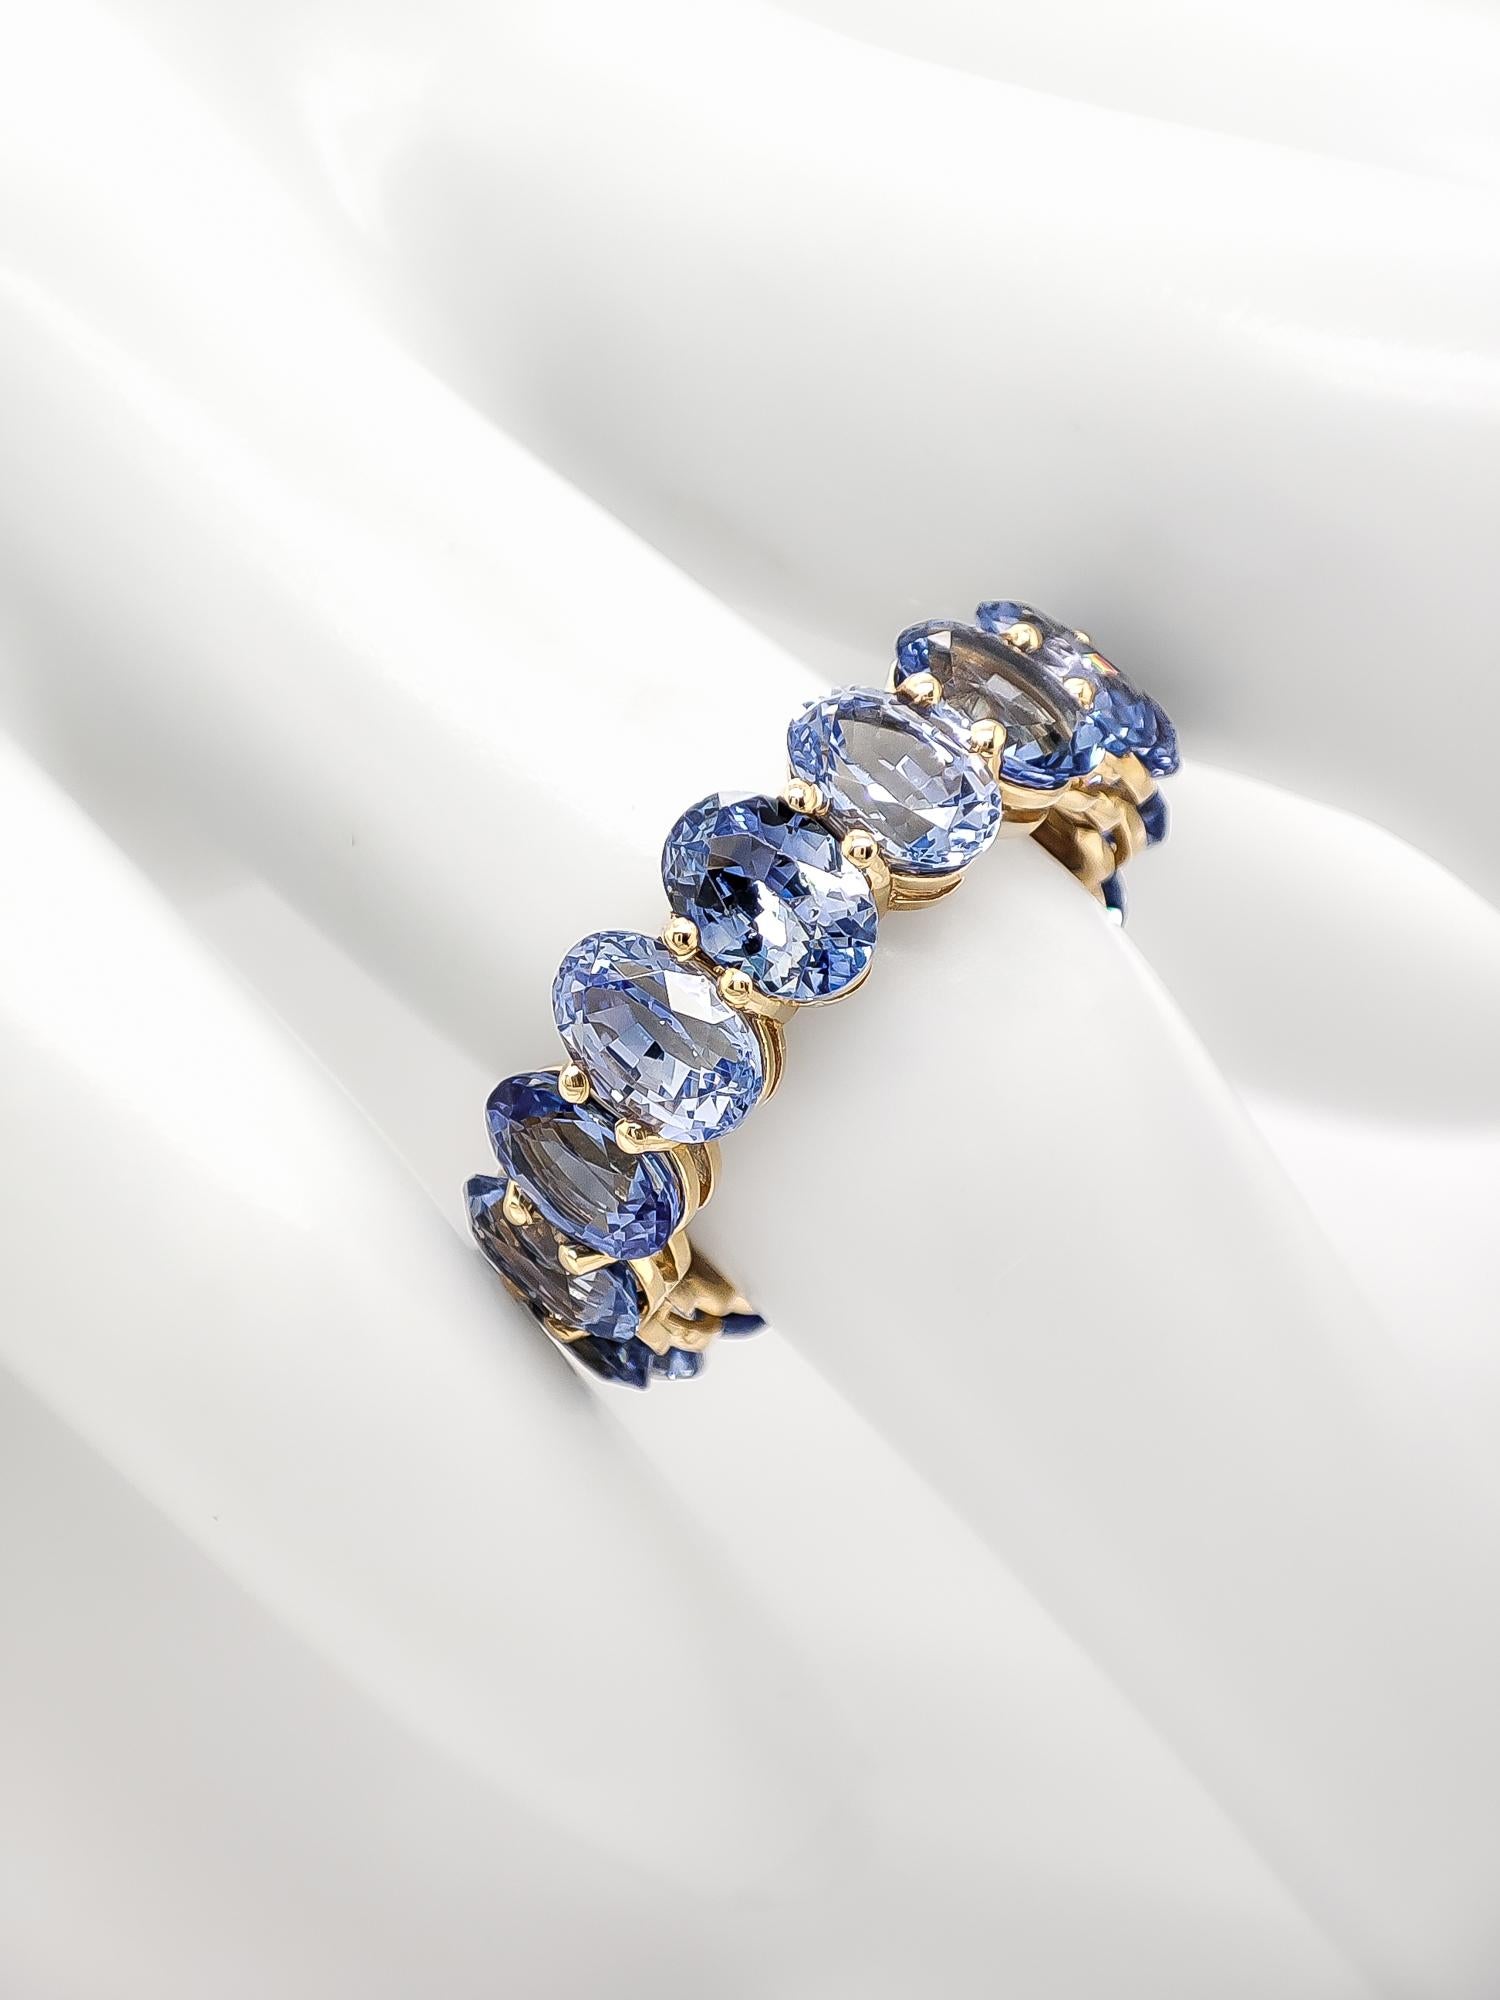 FOR US BUYERS NO VAT

Radiate timeless beauty and grace with this extraordinary 14K yellow gold eternity ring showcasing 16 stunning sapphires totaling an impressive 10.30 carats. The sapphires, in shades of light to medium blue, create a harmonious